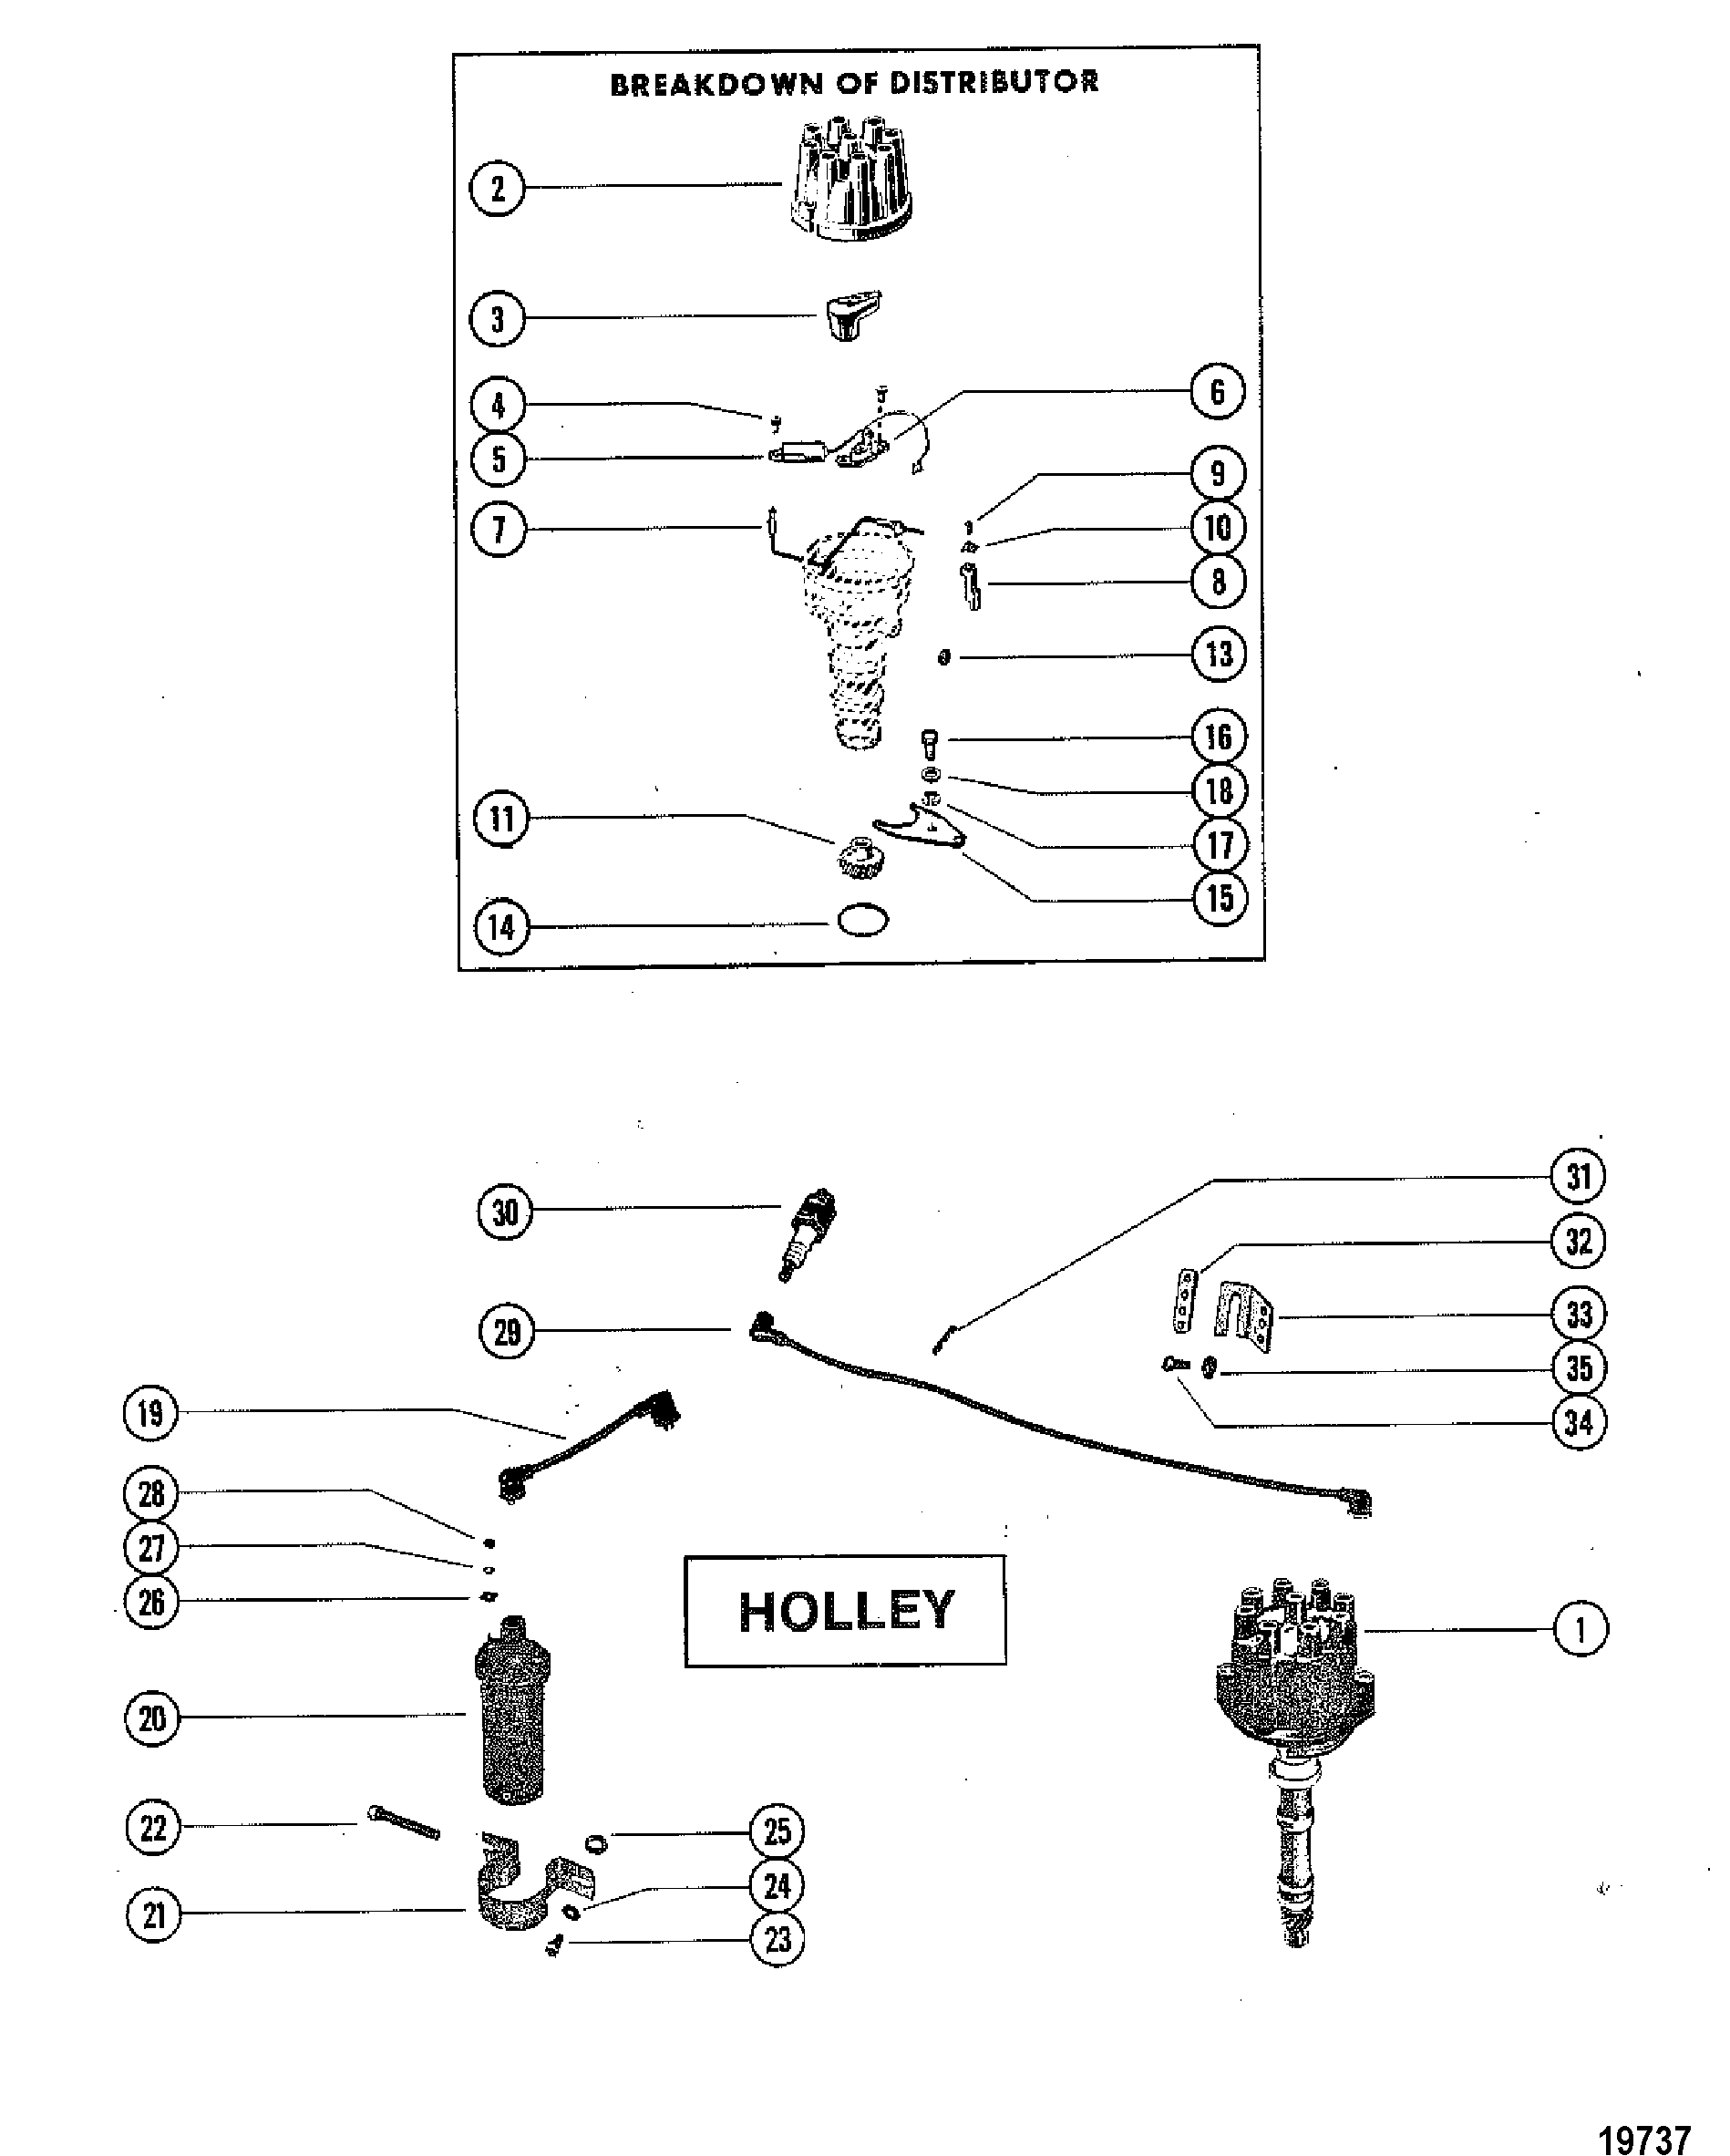 Distributor and Ignition Components(Holley)